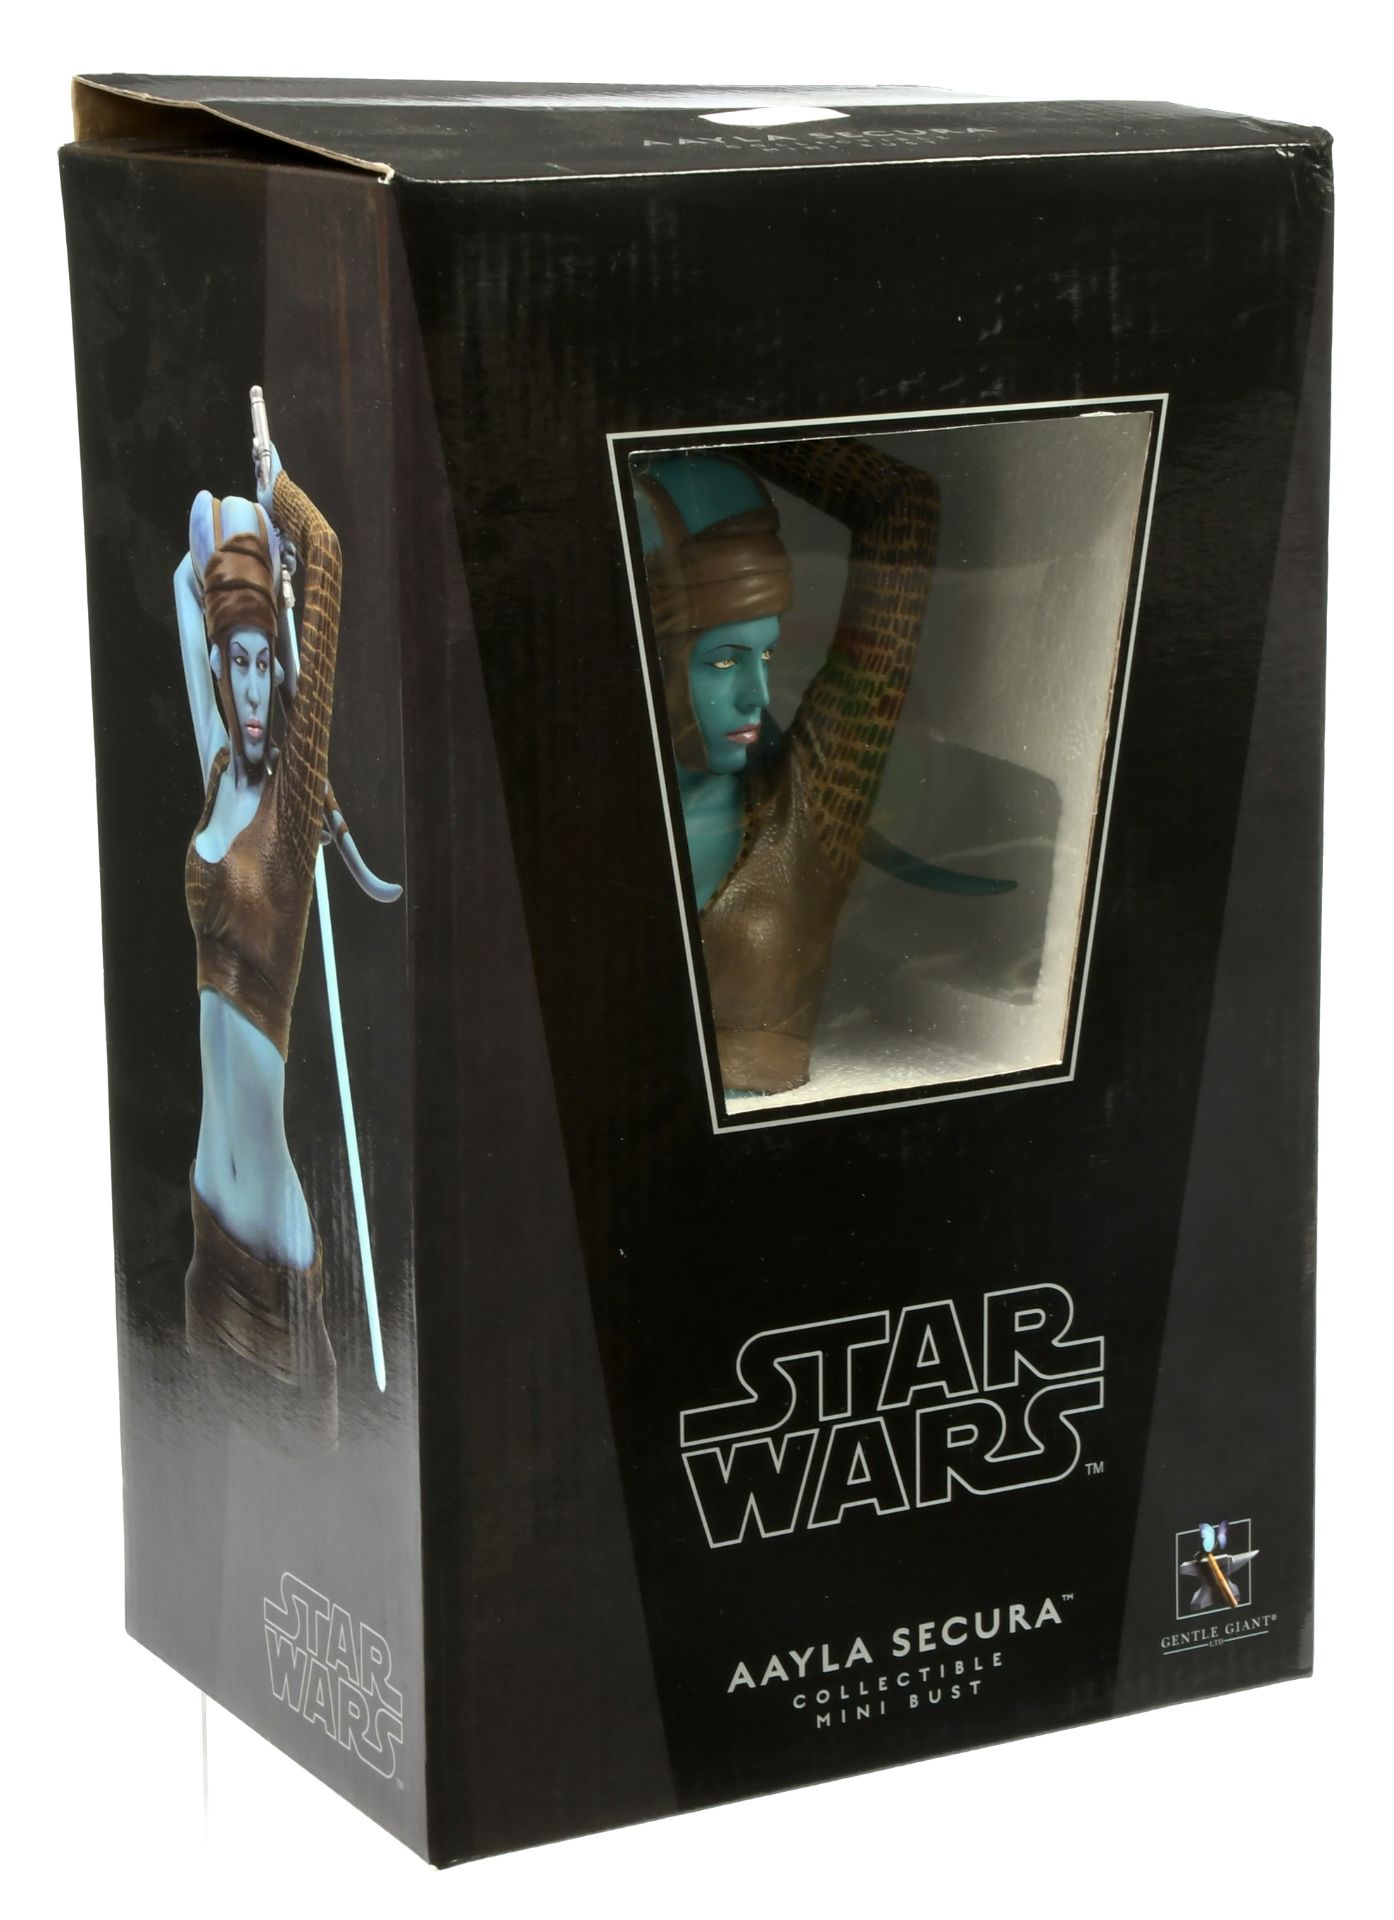 Gentle Giant Star Wars Revenge Of The Sith Aayla Secura collectible mini bust